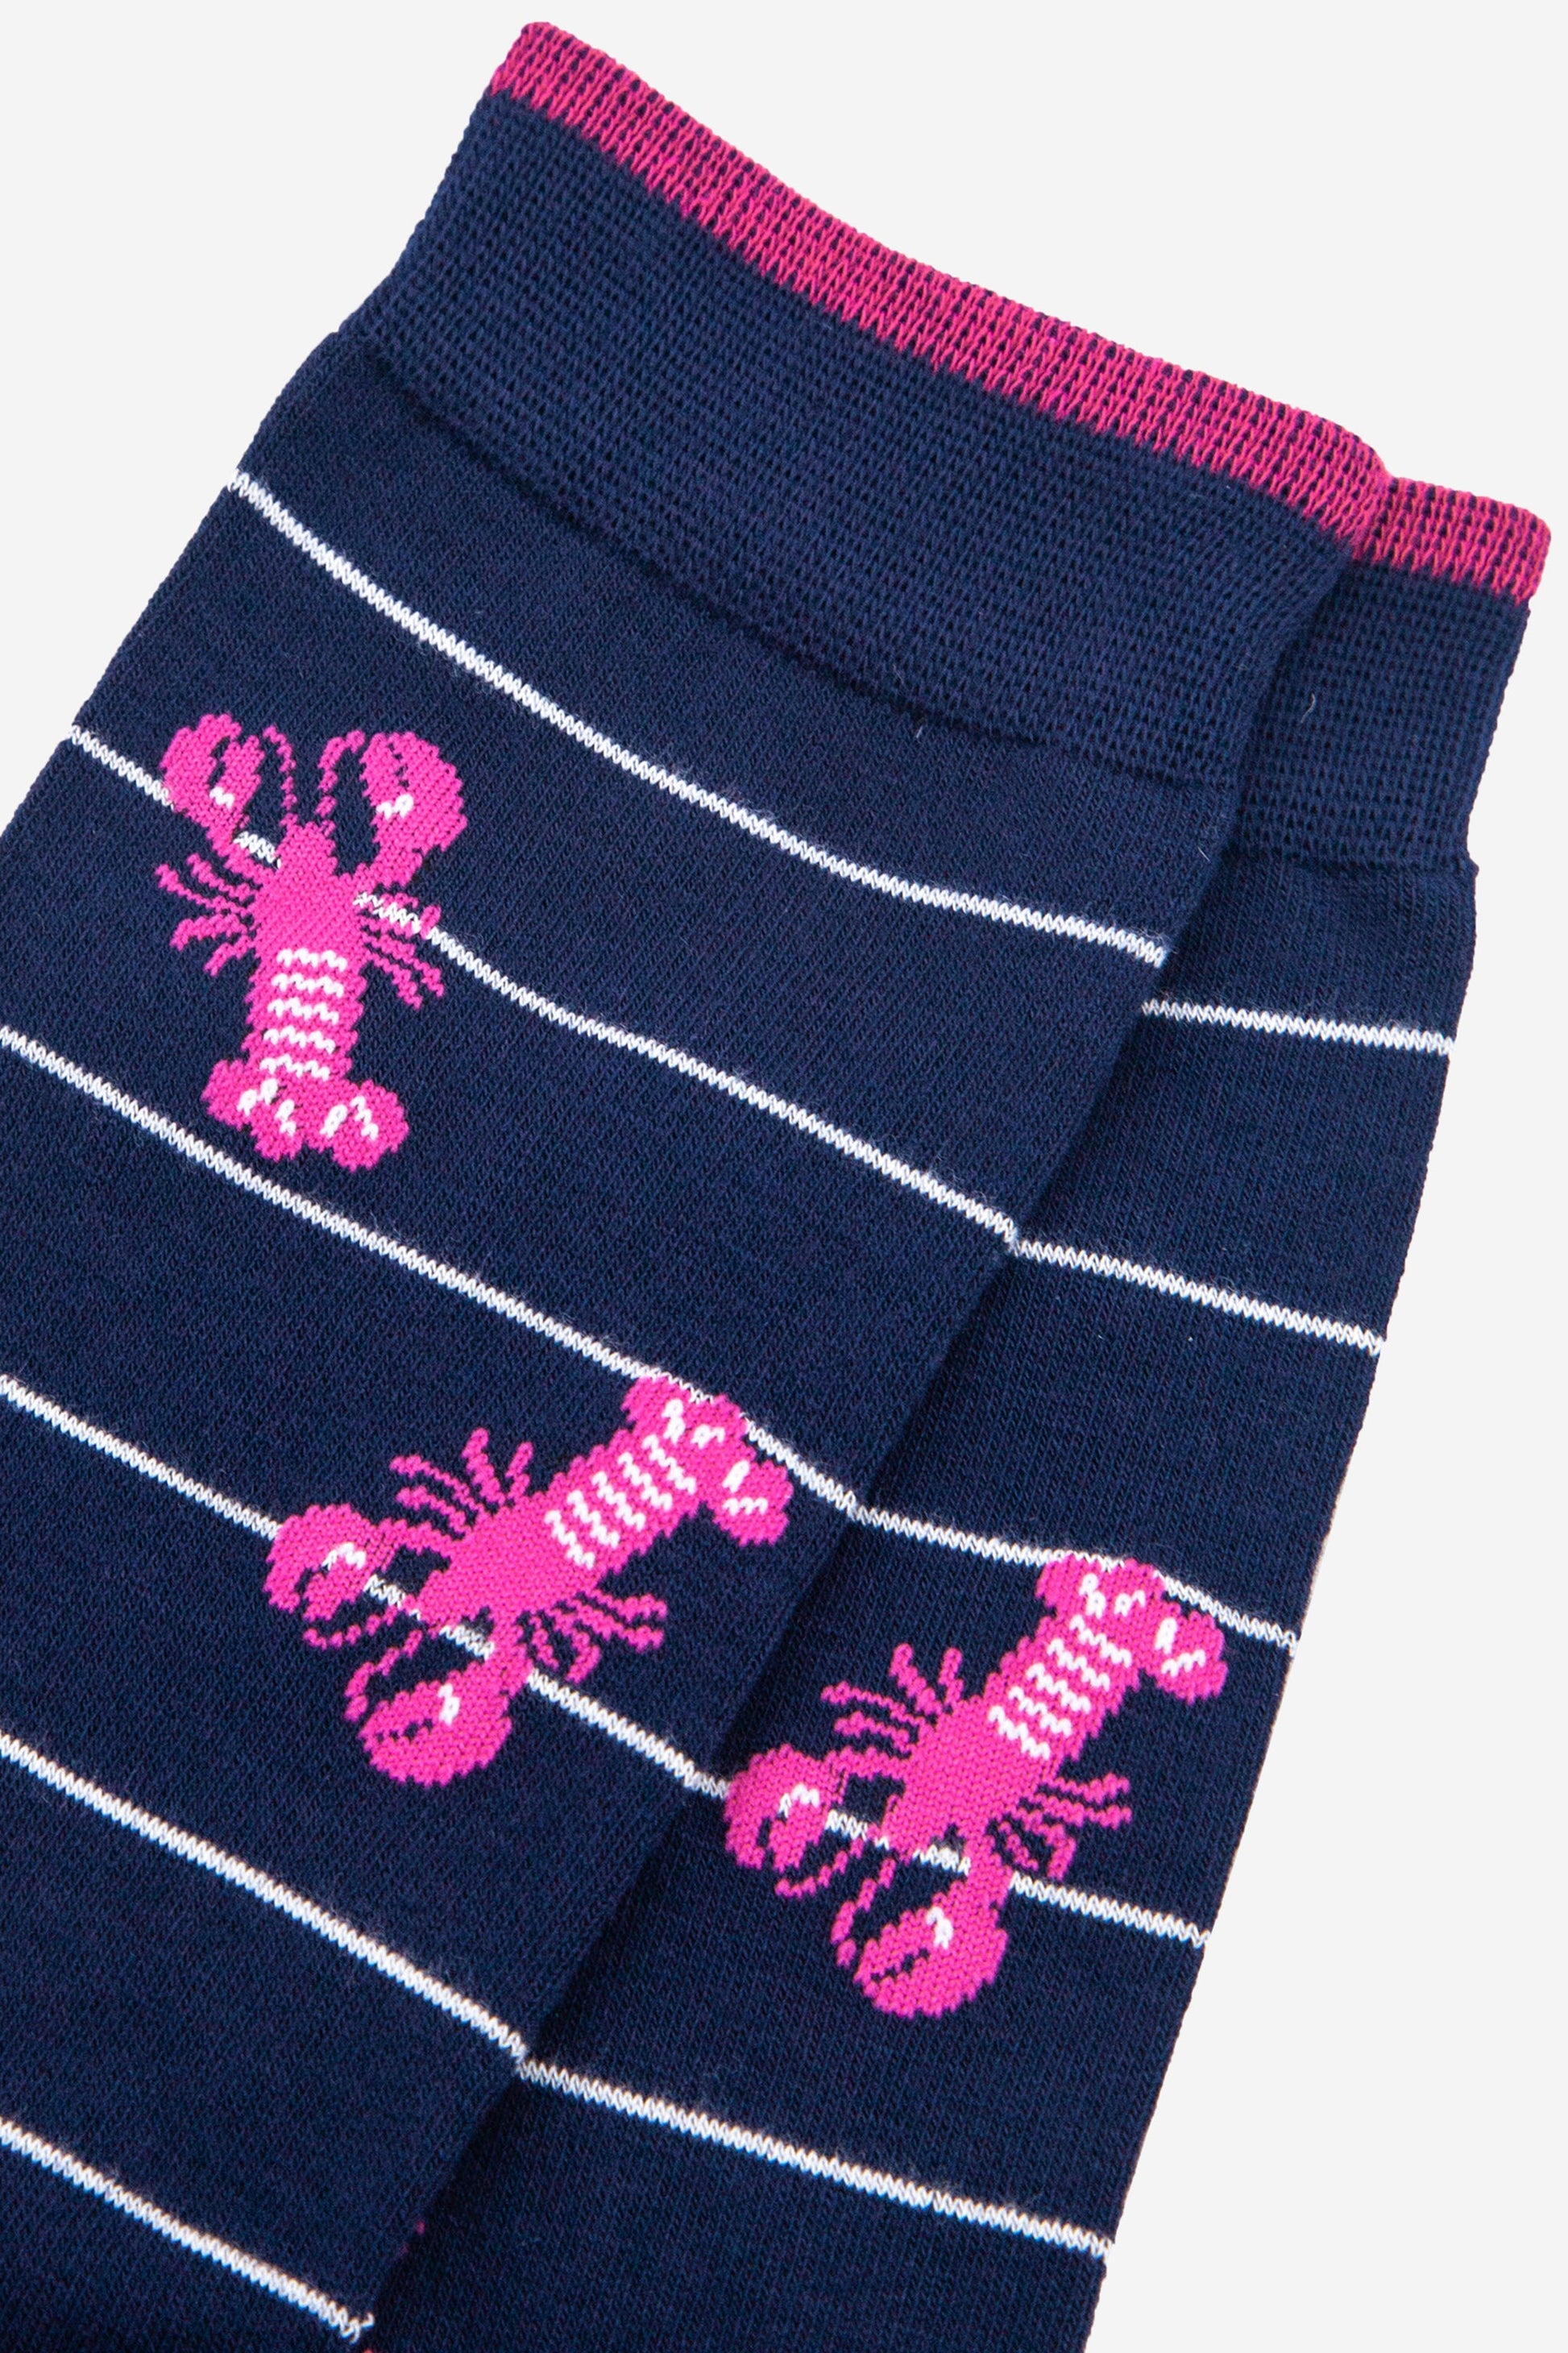 close up of the pink lobster print pattern